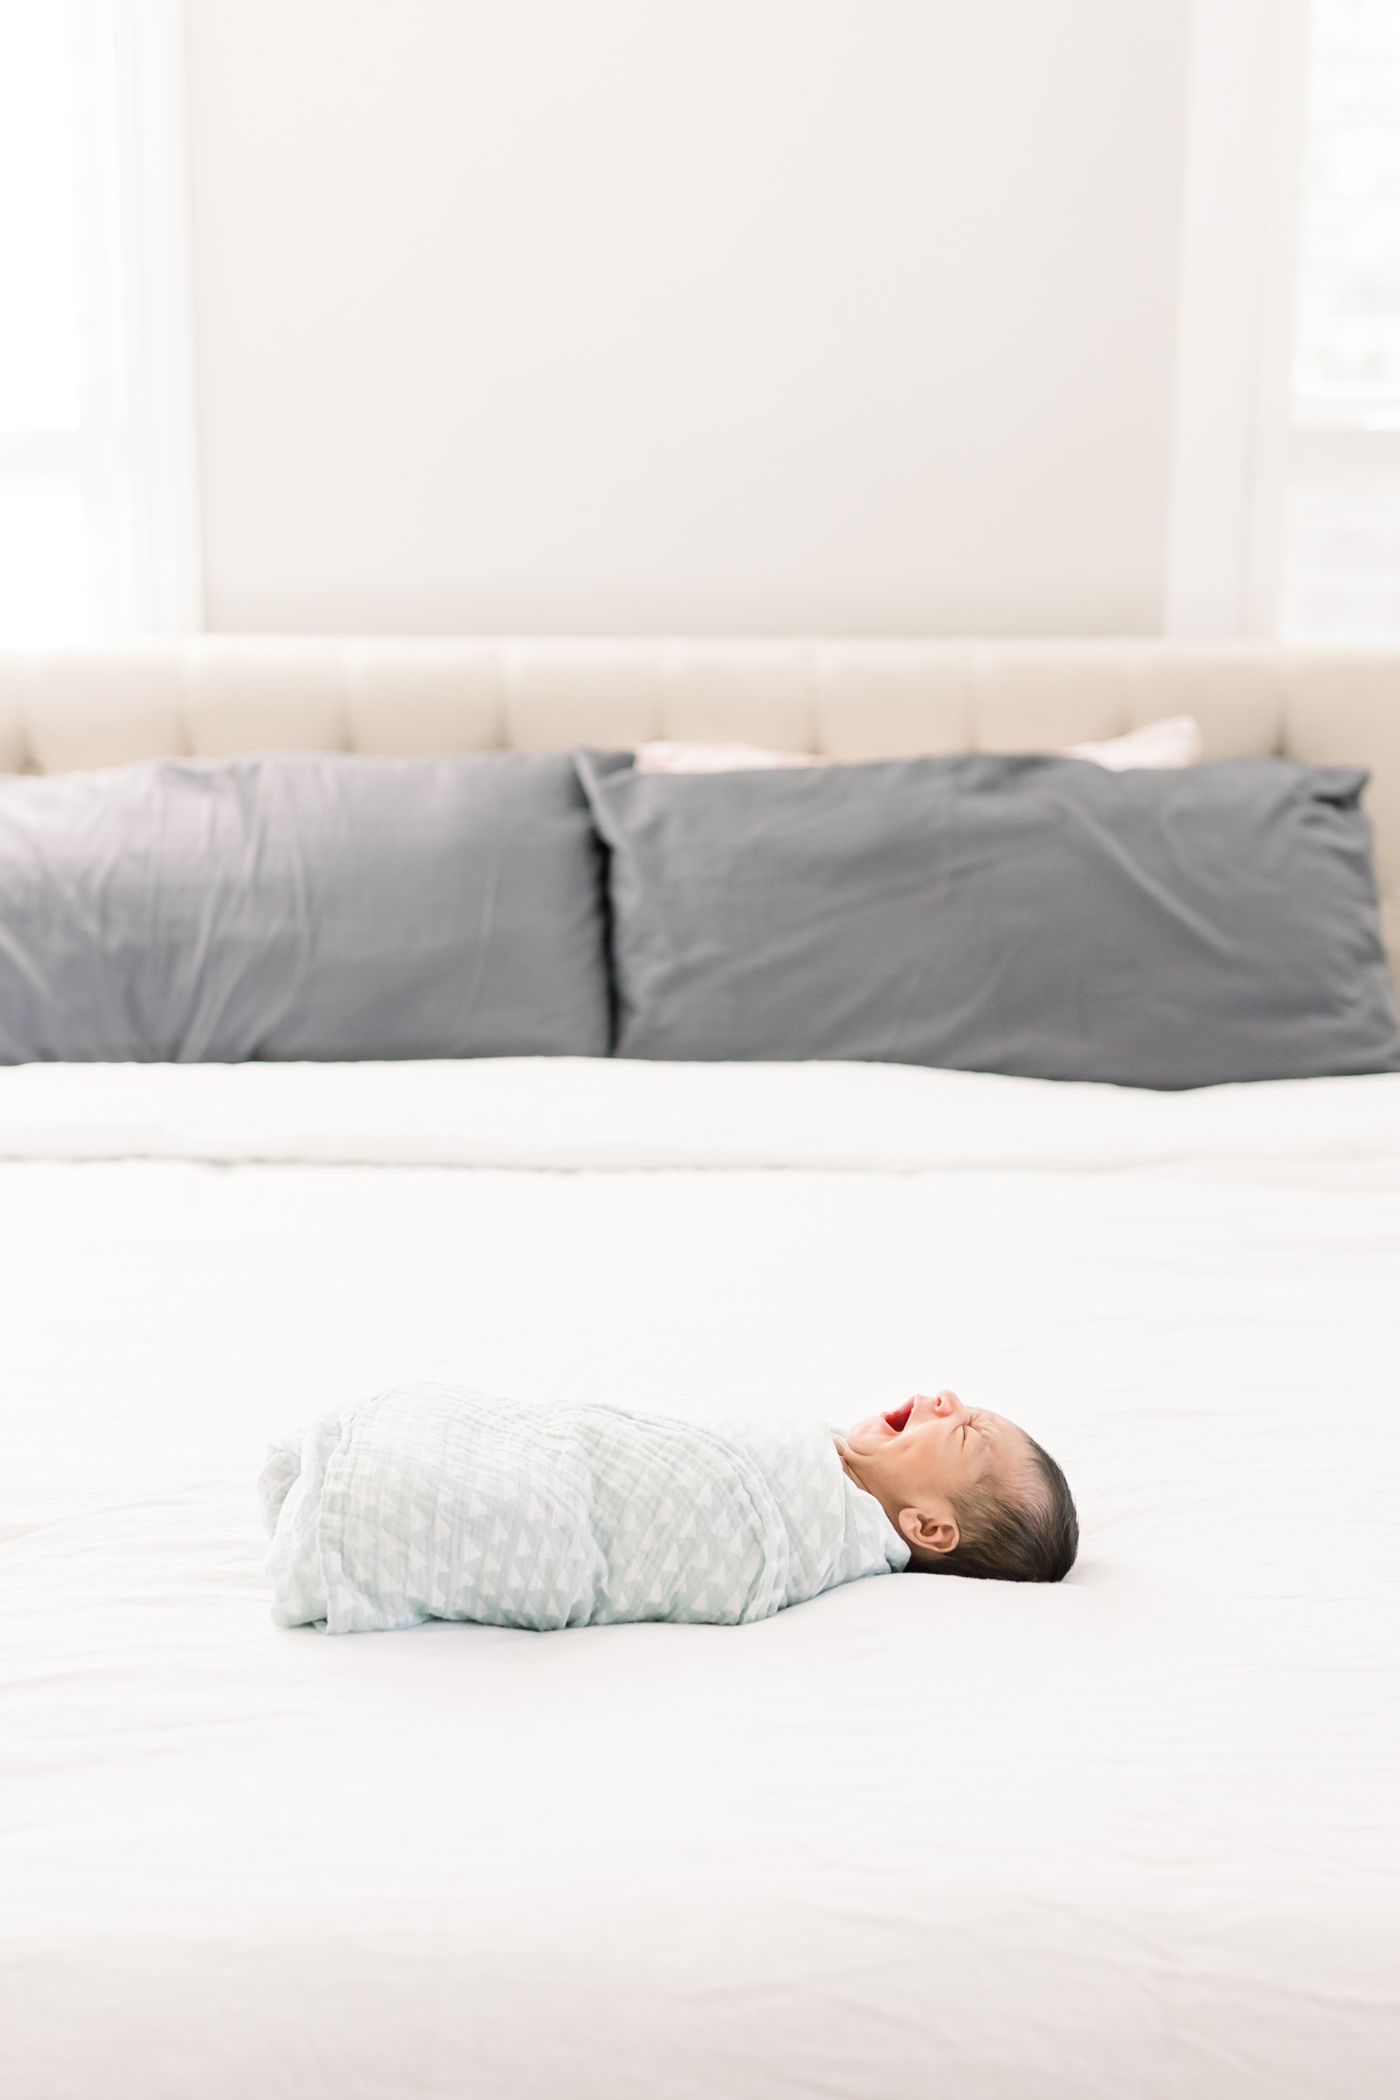 Lifestyle newborn photo of baby boy yawning. He's swaddled and laying on bed. Photo by Caitlyn Motycka Photography.